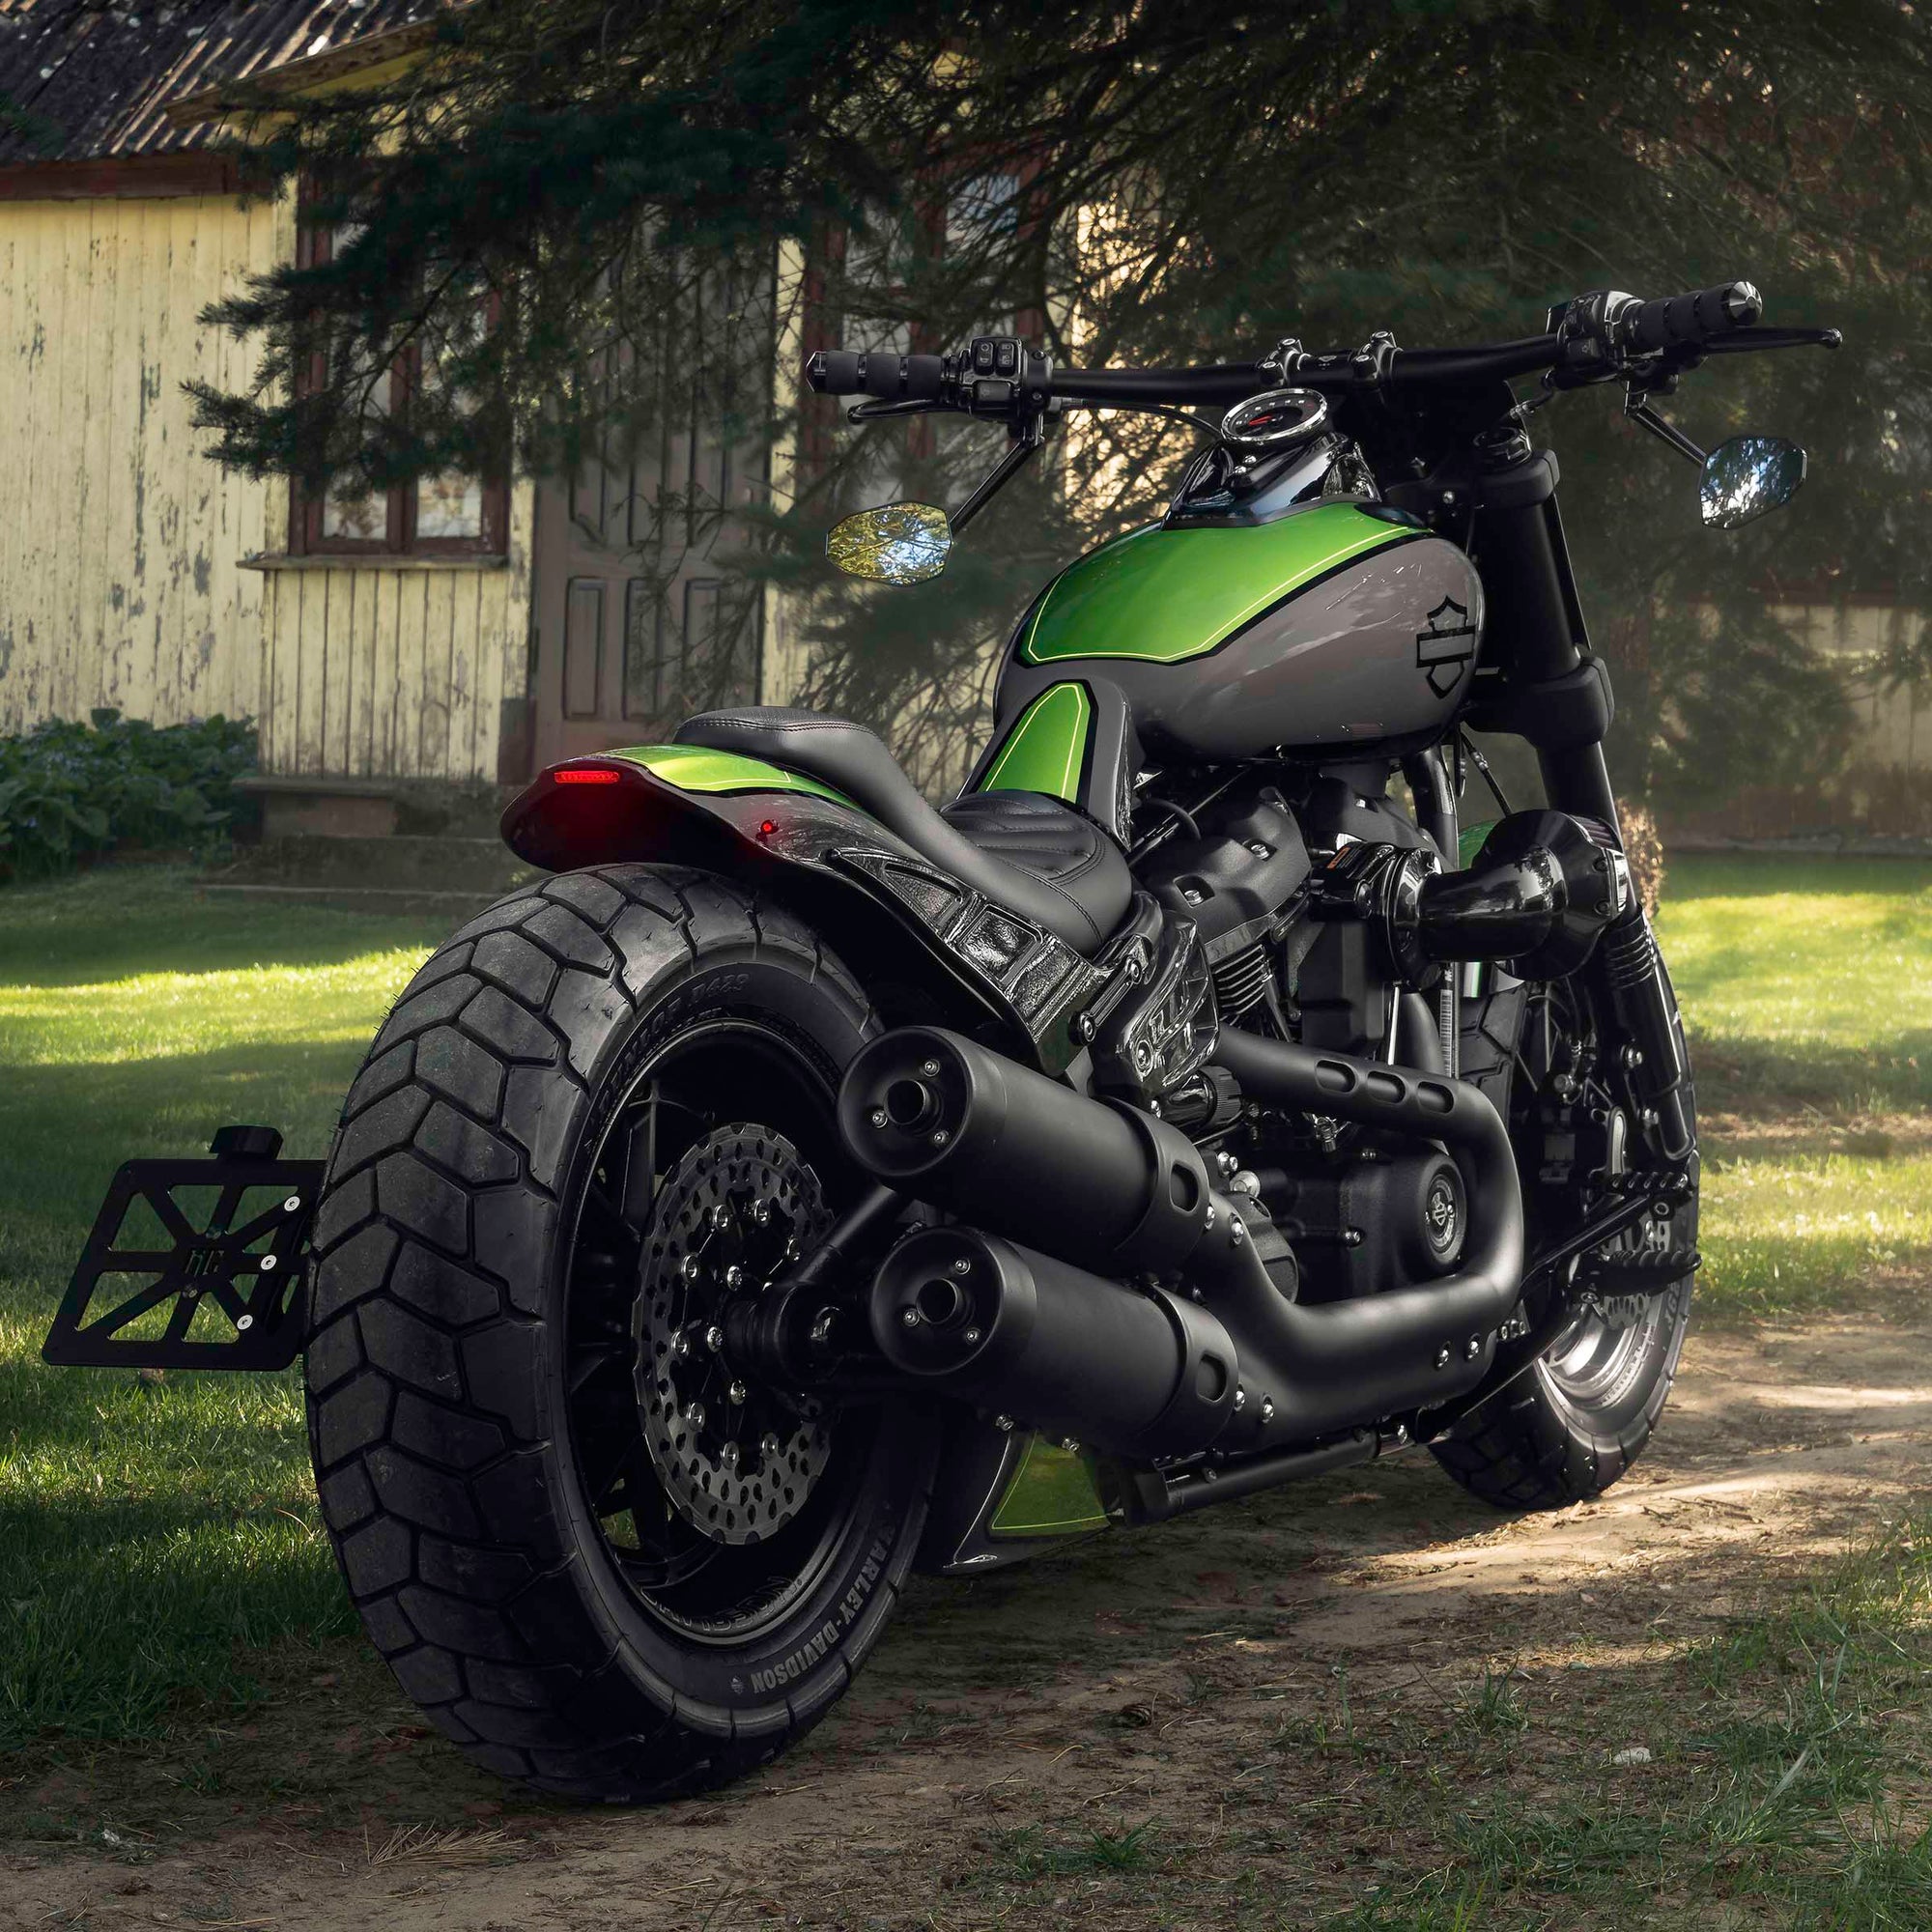 Modified Harley Davidson Fat Bob motorcycle with Killer Custom parts from the side with some trees and the country house in the background